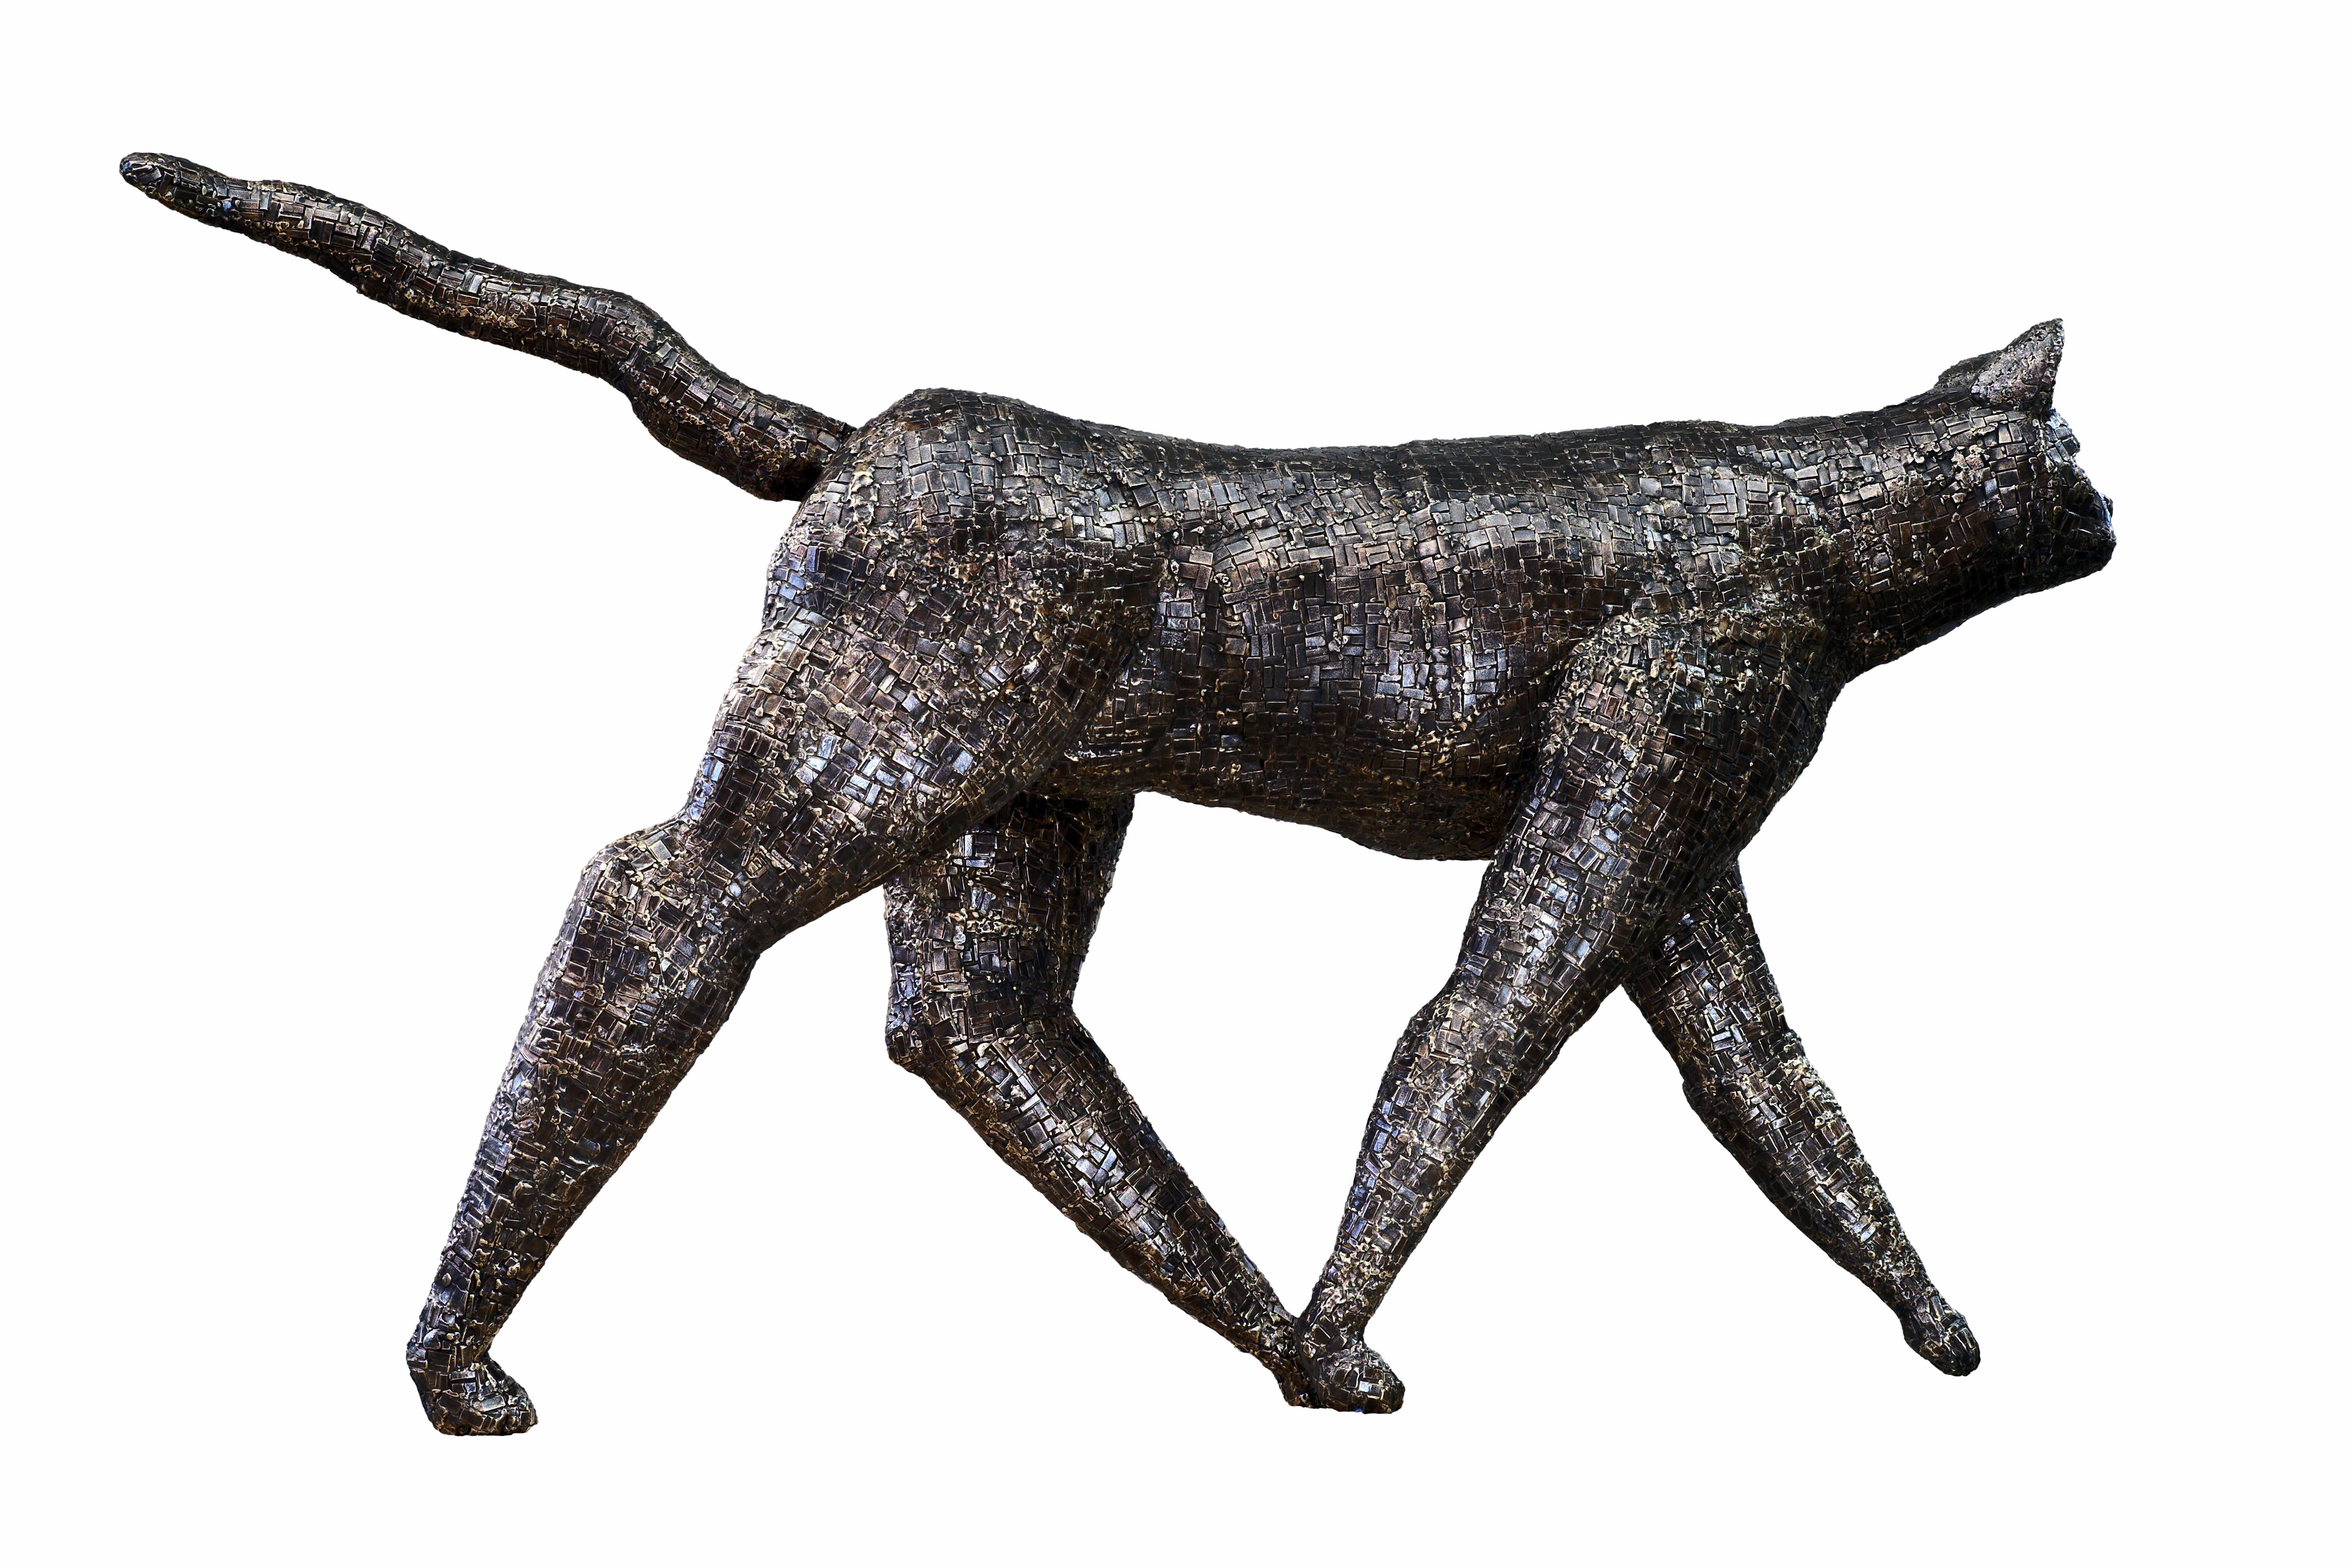 North American Walking Cat - Lion Sized Bronze Cat Sculpture with Mosaic Patterned Surface For Sale